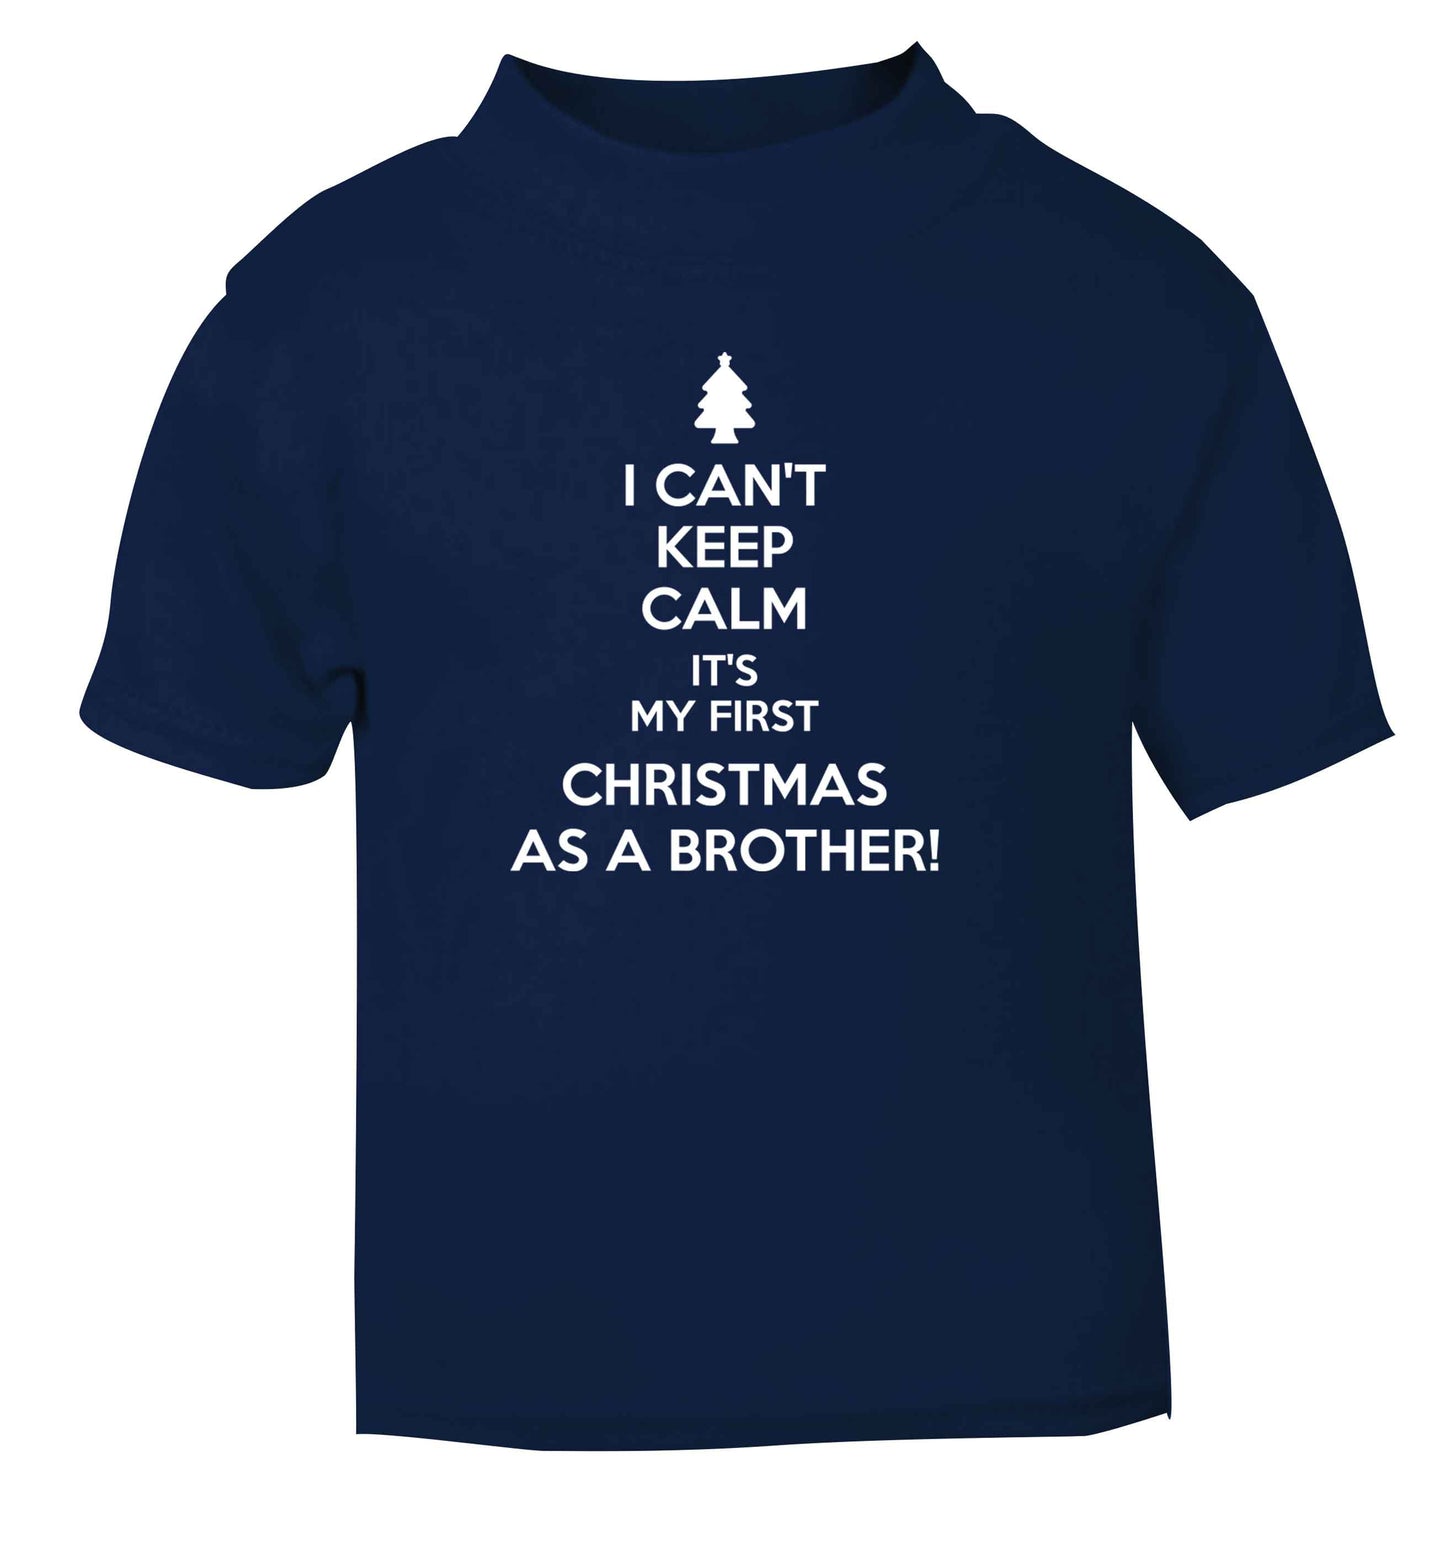 I can't keep calm it's my first Christmas as a brother! navy Baby Toddler Tshirt 2 Years